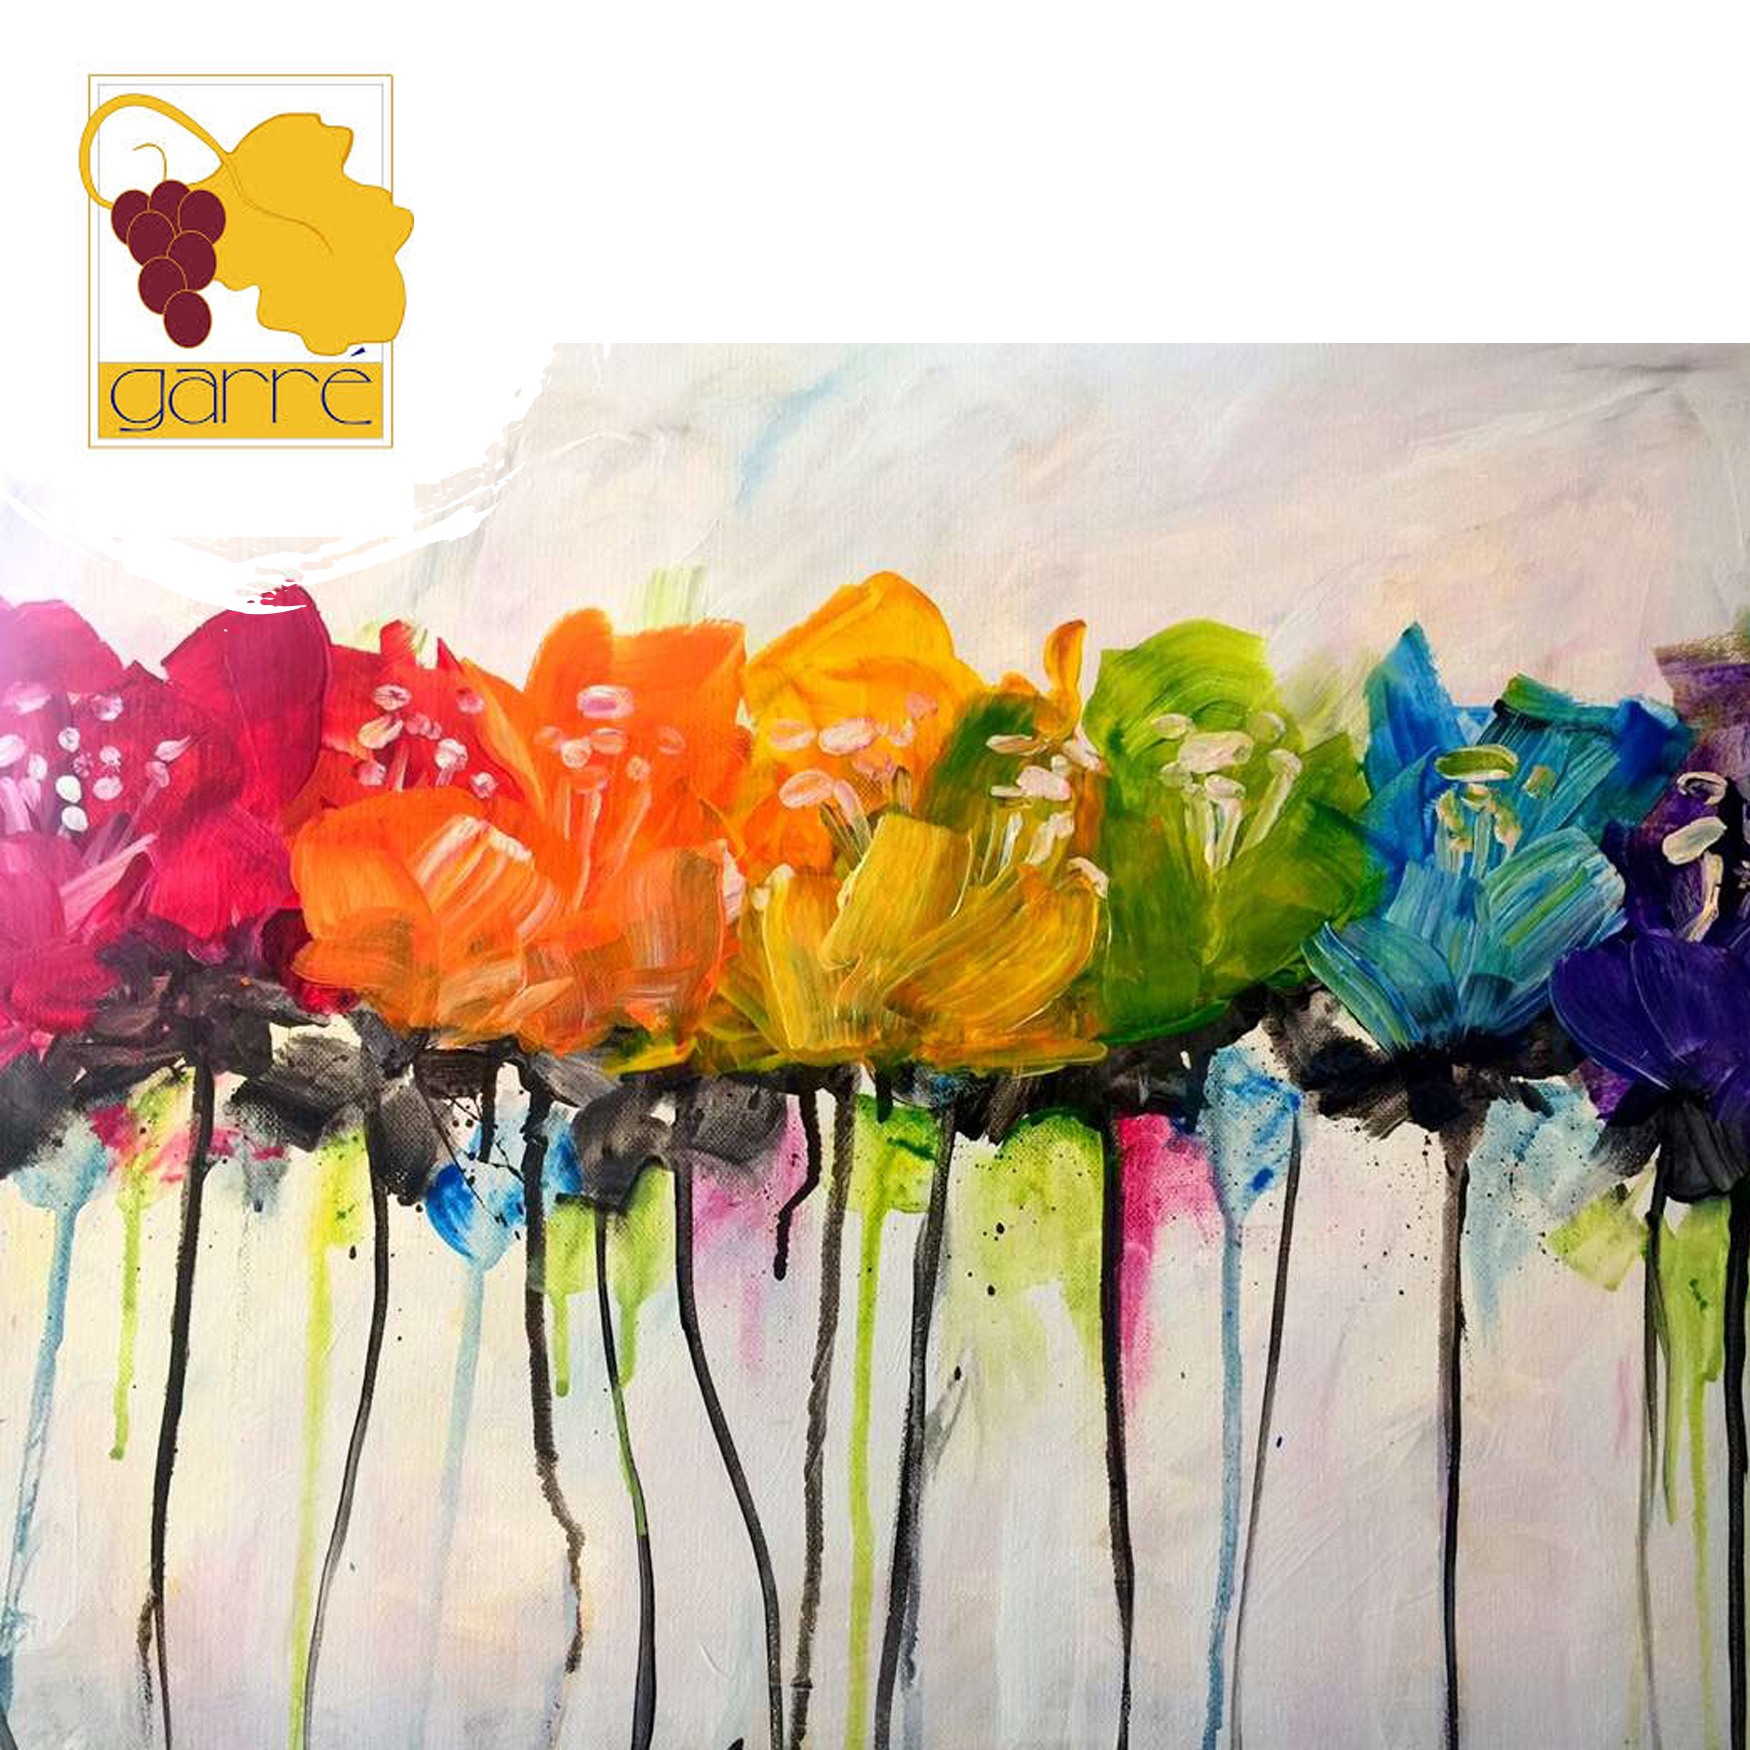 Sip & Paint at Garre Winery